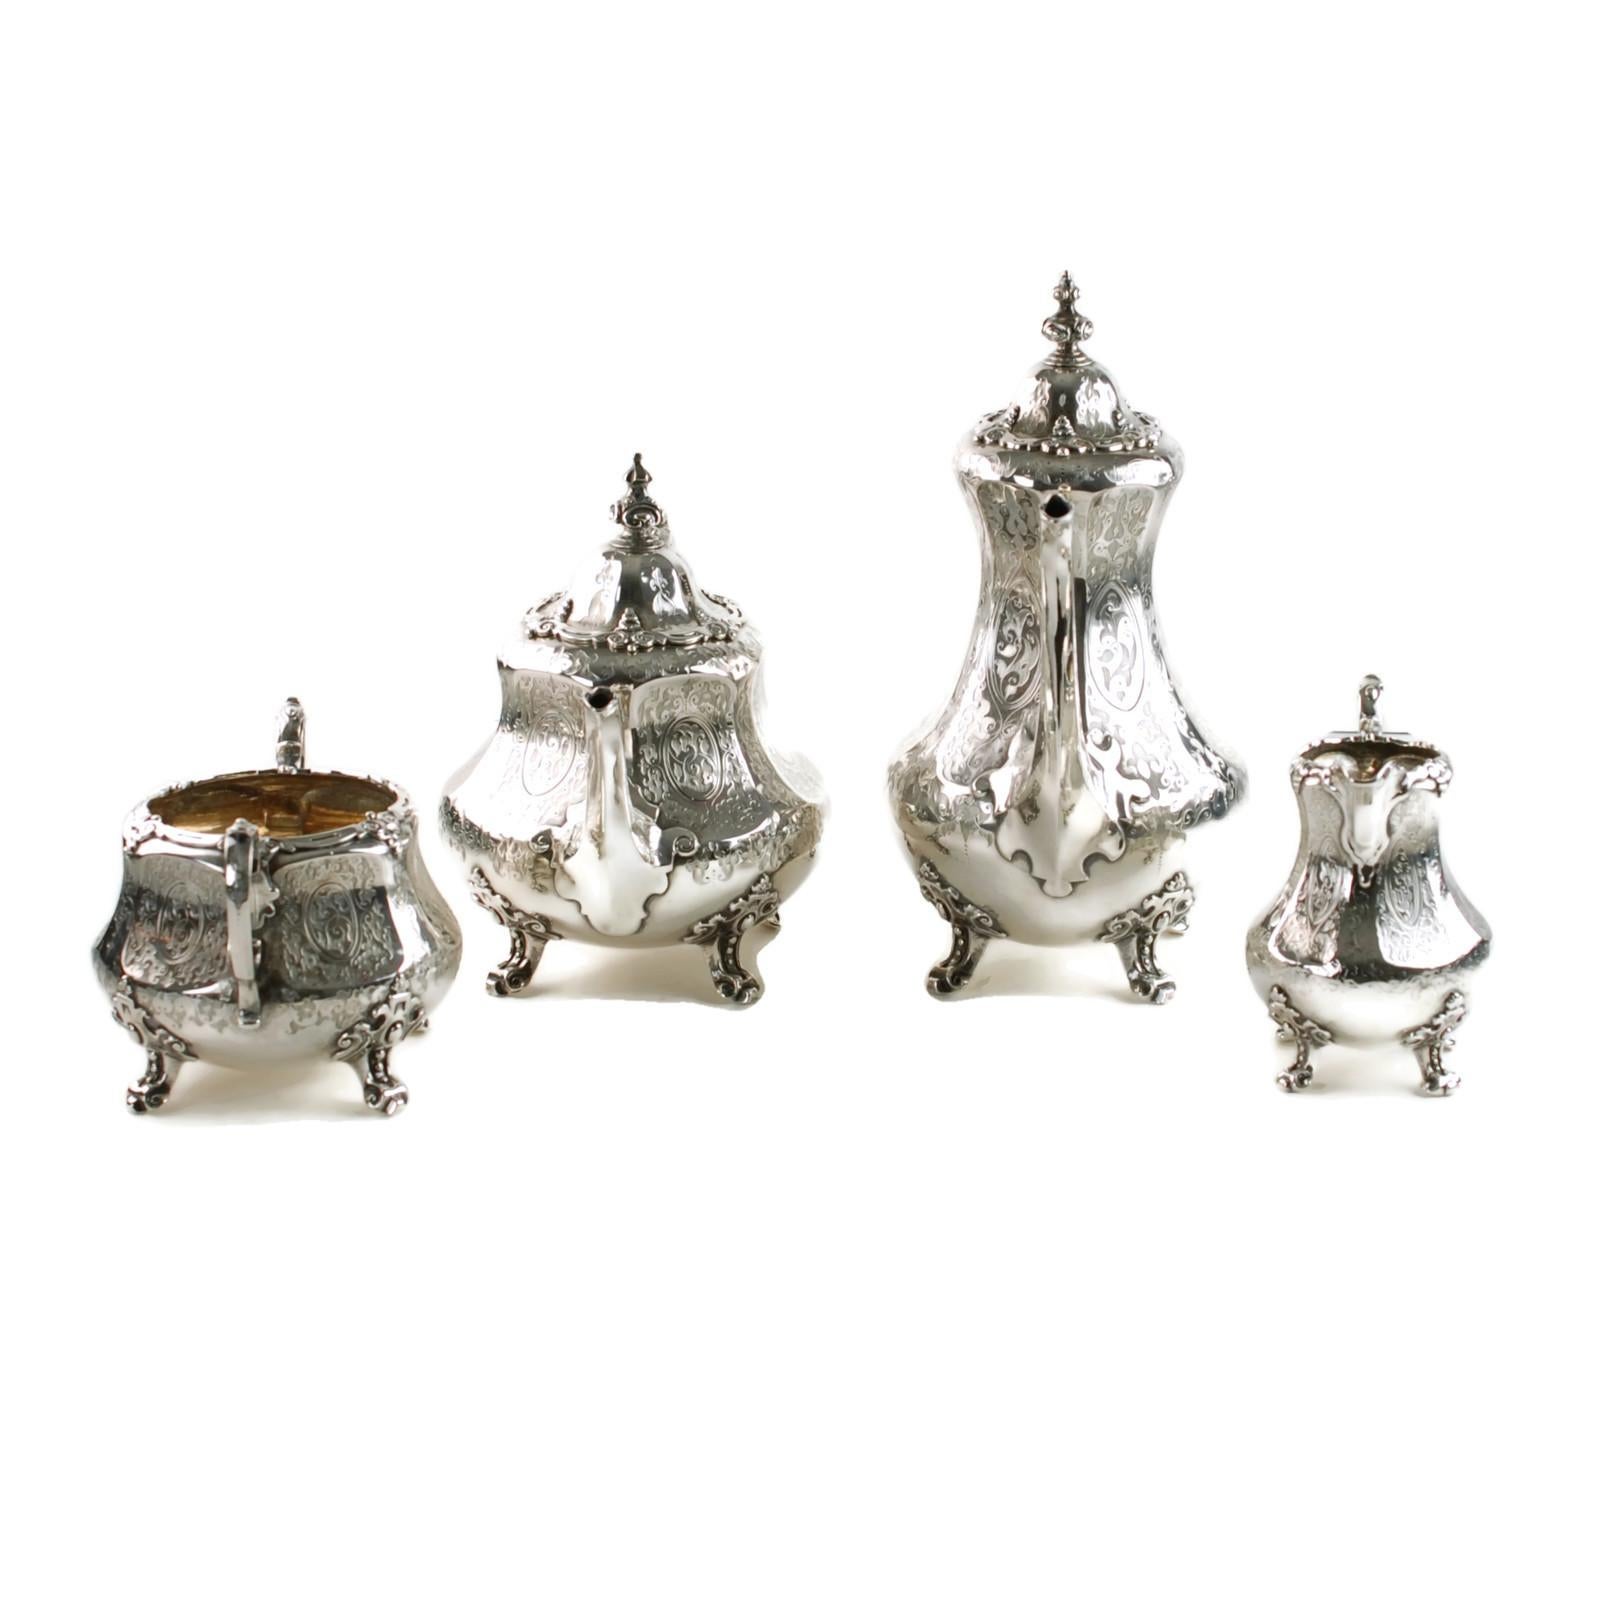 This antique Victorian solid sterling silver 4-piece tea and coffee set was made in 1863 by London silversmiths Daniel & Charles Houle. The set is comprised of a coffee pot, a teapot, a sugar bowl and a cream jug, each of which has a pear-shaped